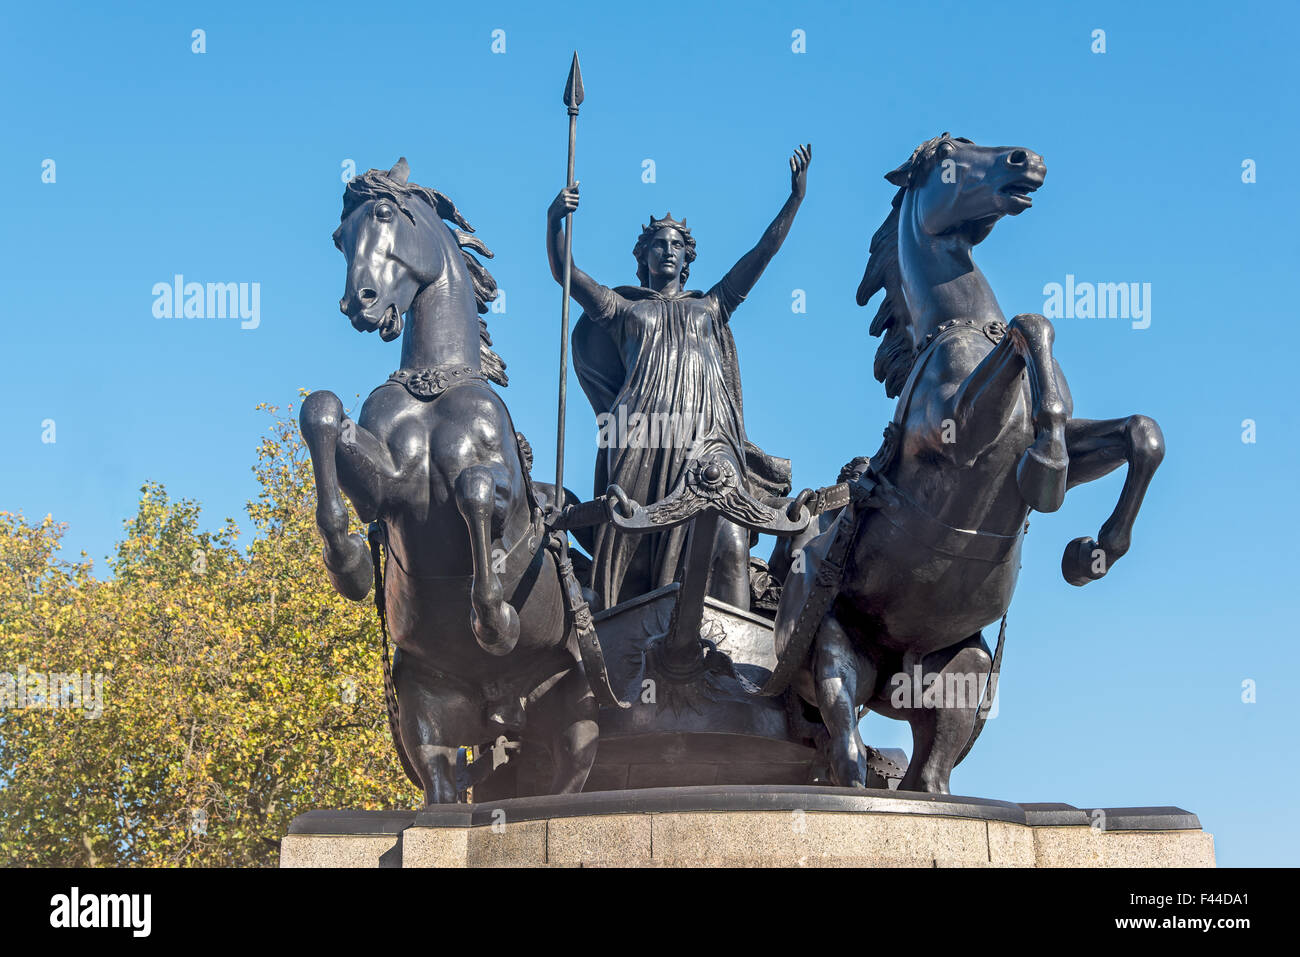 Statue of Boudica, Queen of the Iceni, located at the junction of The Embankment and Westminster Bridge, London Stock Photo